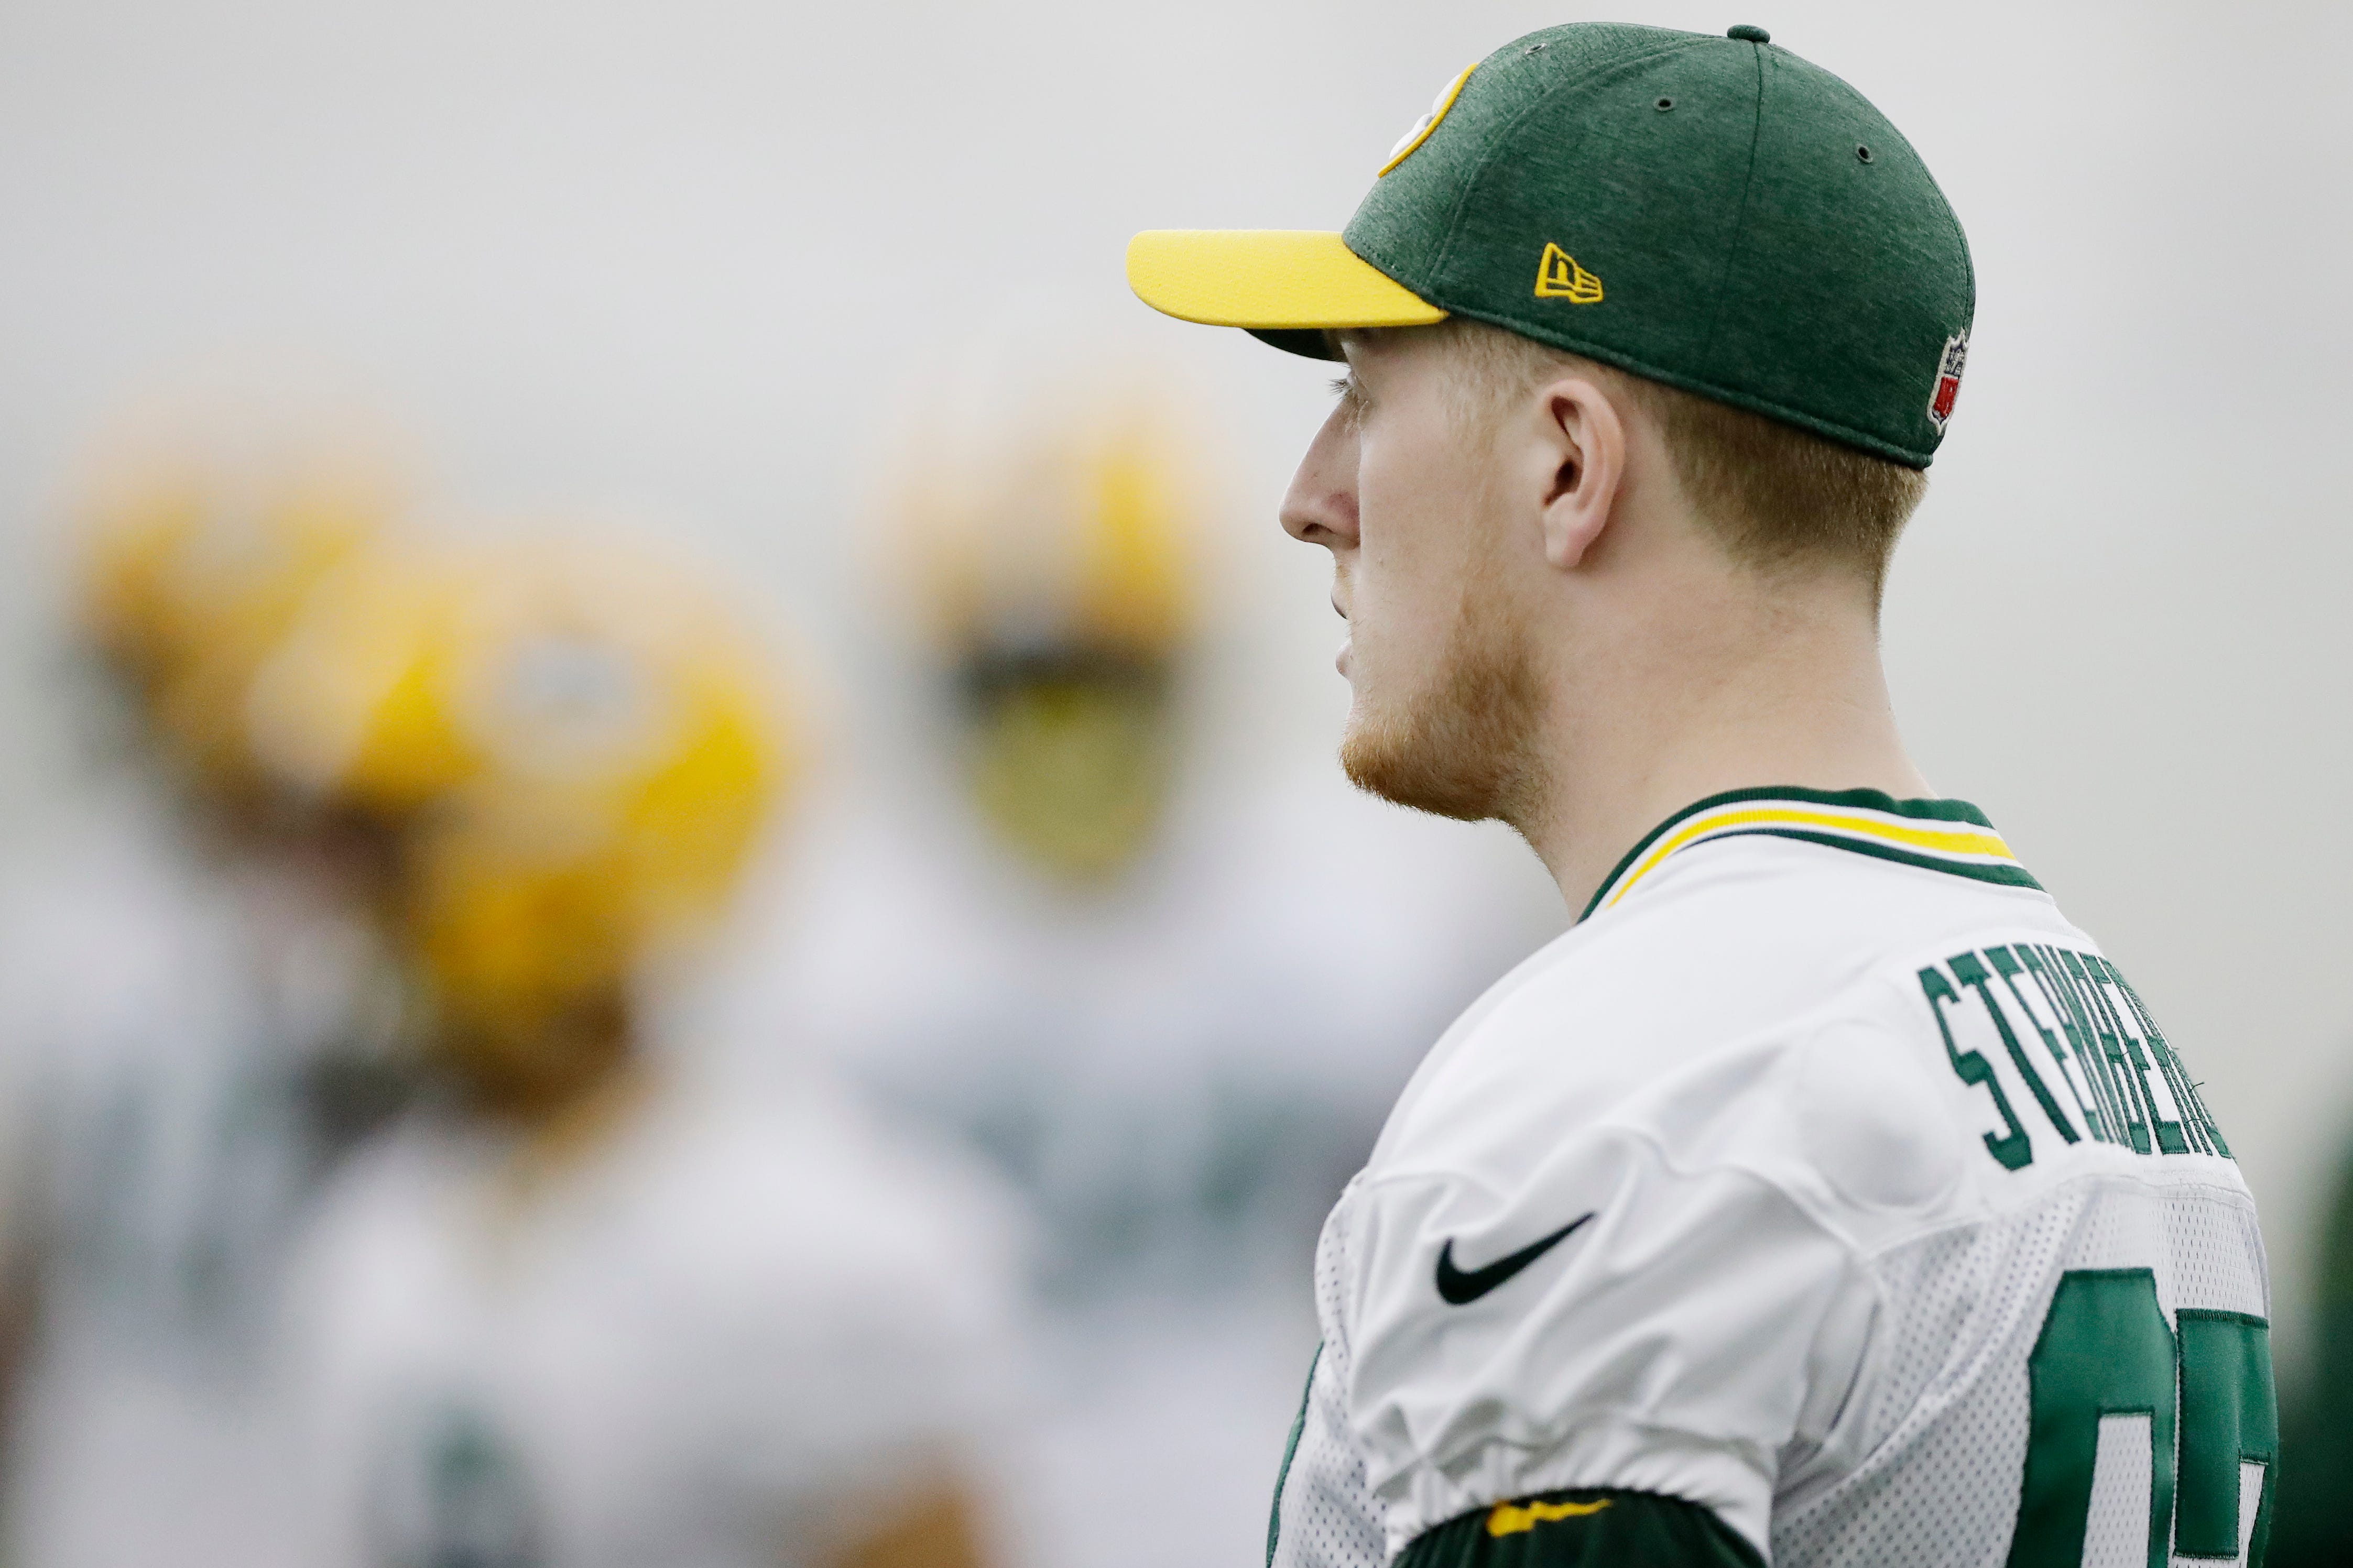 Green Bay Packers tight end Jace Sternberger (87) during practice at rookie minicamp at the Don Hutson Center on Friday, May 3, 2019 in Ashwaubenon, Wis.
Adam Wesley/USA TODAY NETWORK-Wis